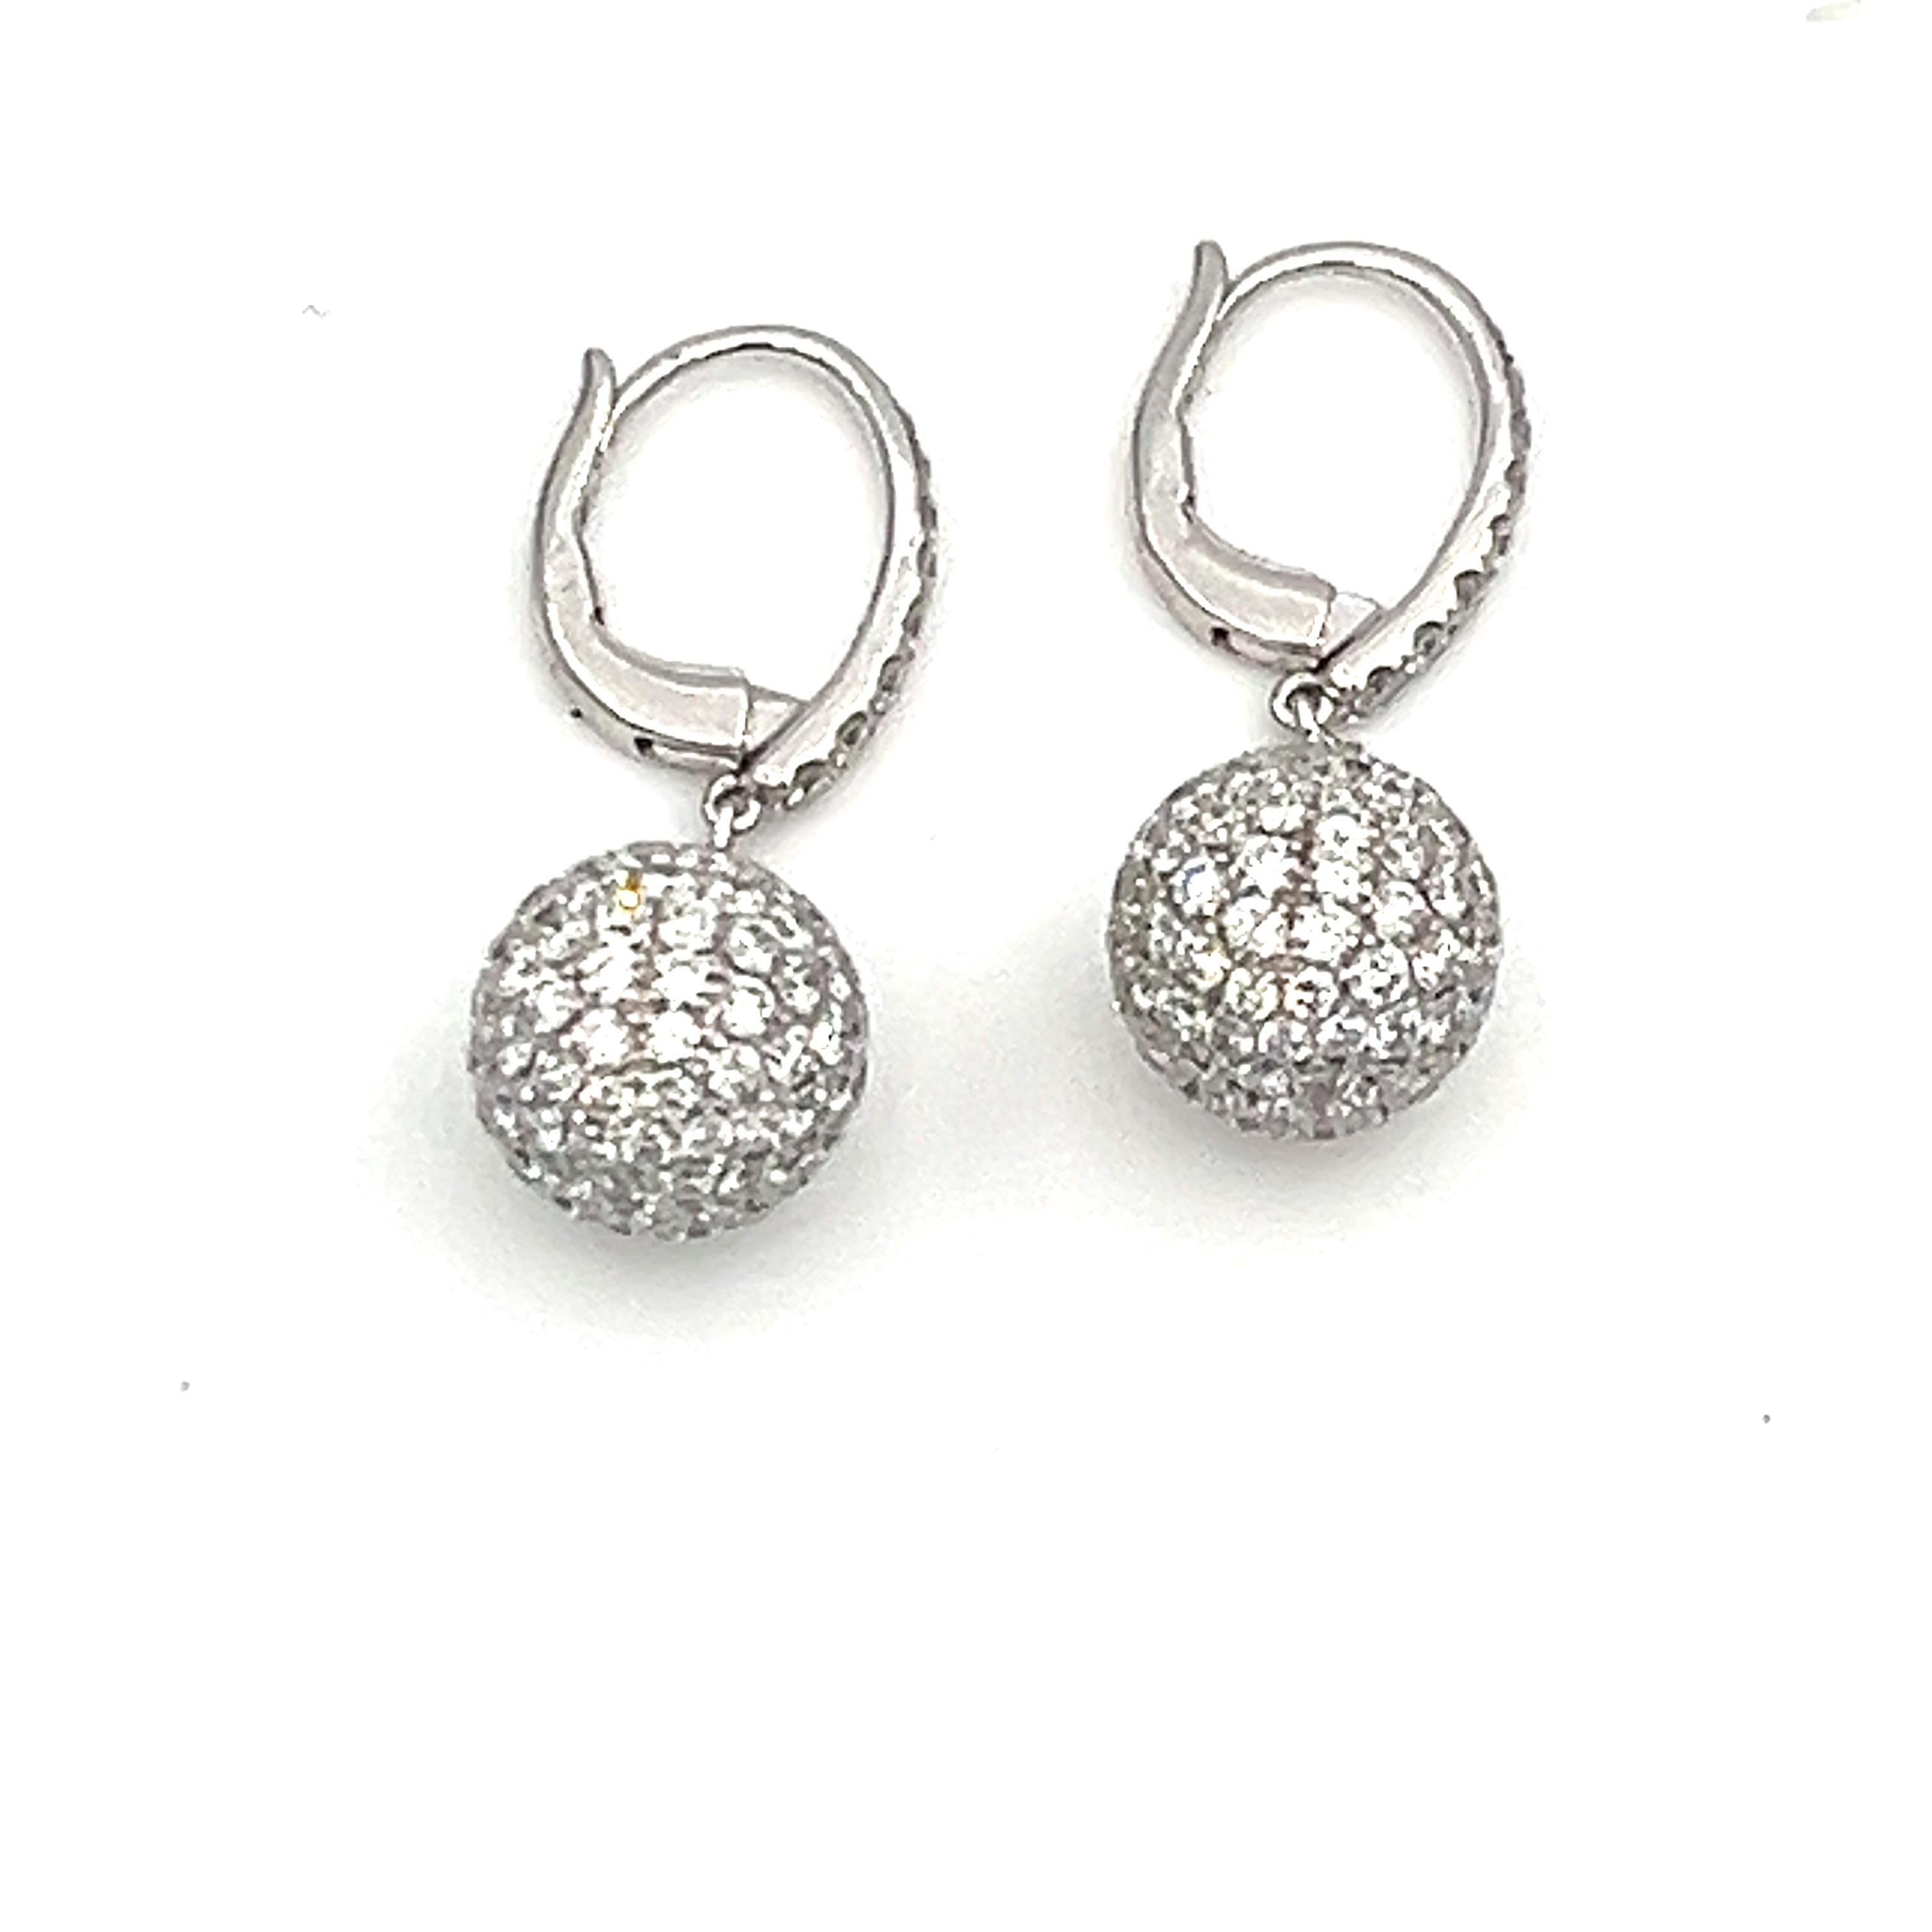 These stunning pave round diamond shape dangle earrings feature 248 diamonds weighing 4.32 carats and graded F/G in color and VS1 in clarity.